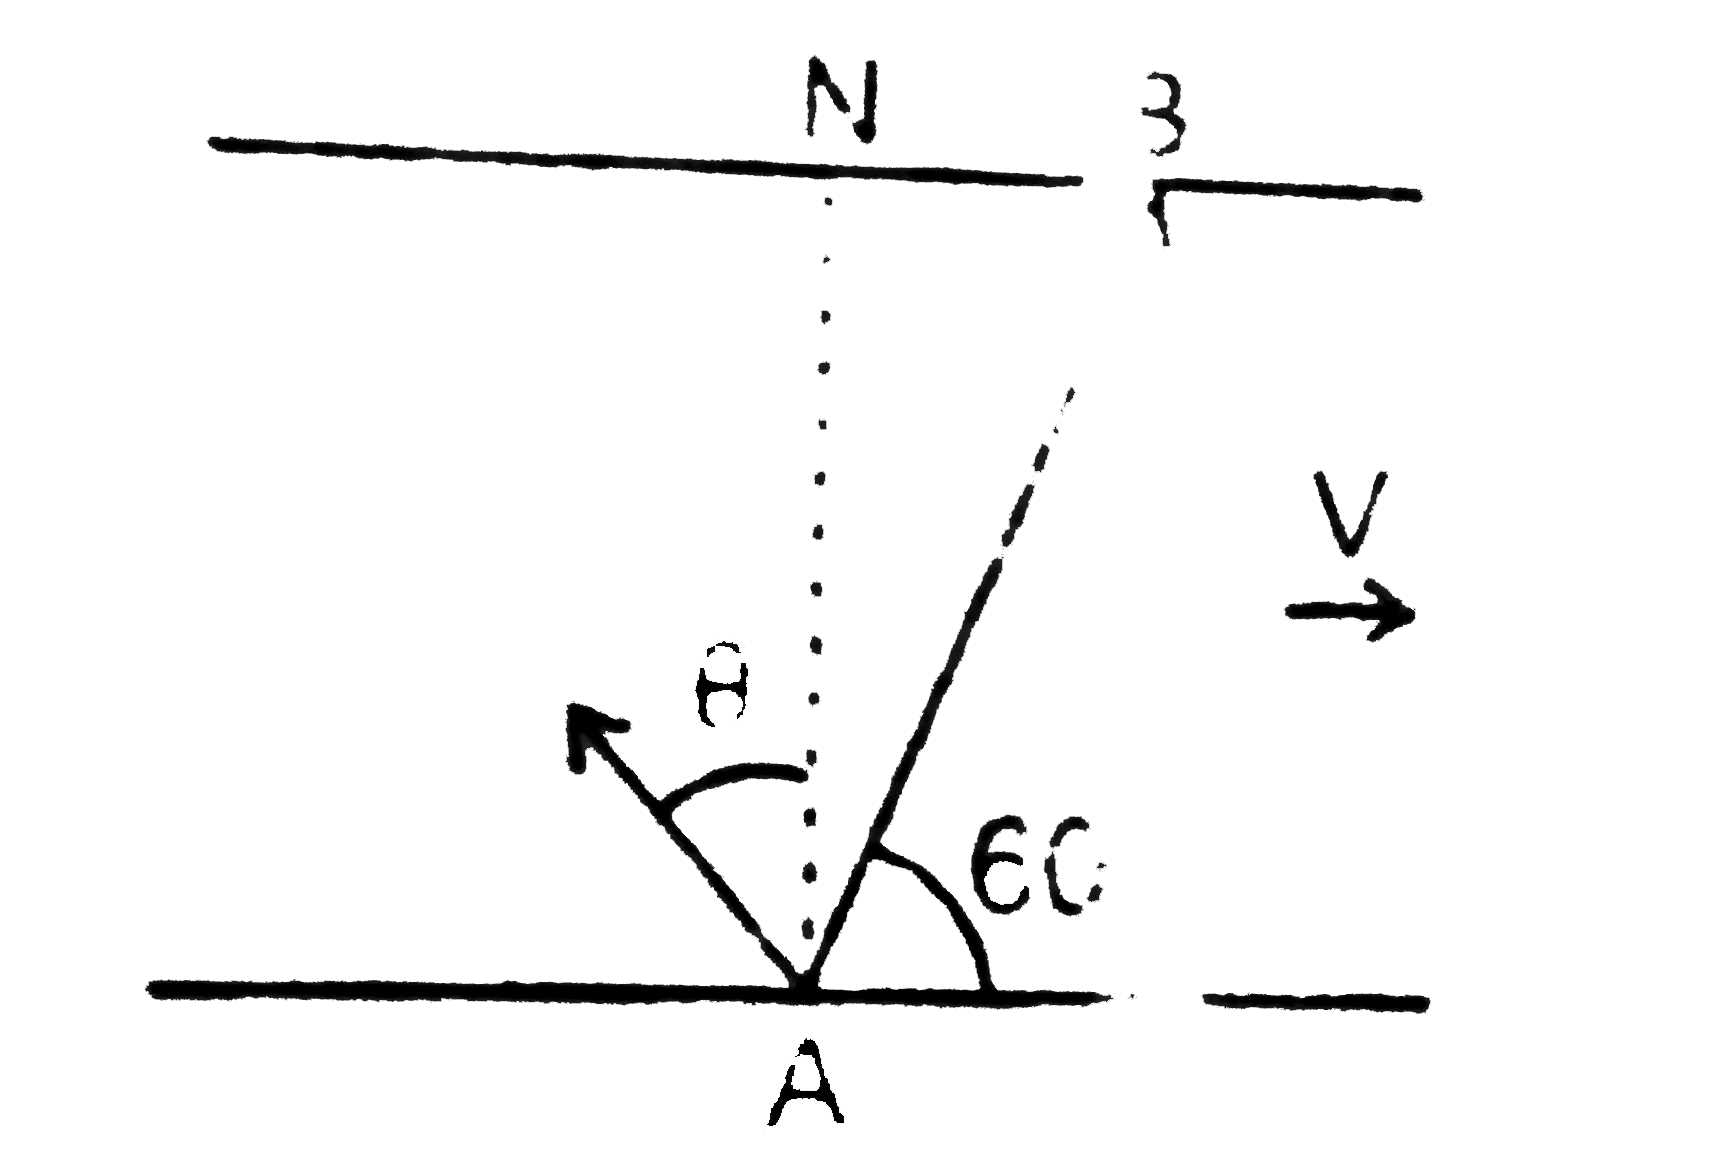 A swimmer wands to cross a river and reach point B directly from A. The speed of the wimmer in still river and that of river flow are same. The dotted line AN is normal to flow direction of river. For swimmer to reach point B, the angle his velocity relative to river will make with line AN is given by theta. then the value of theta is :